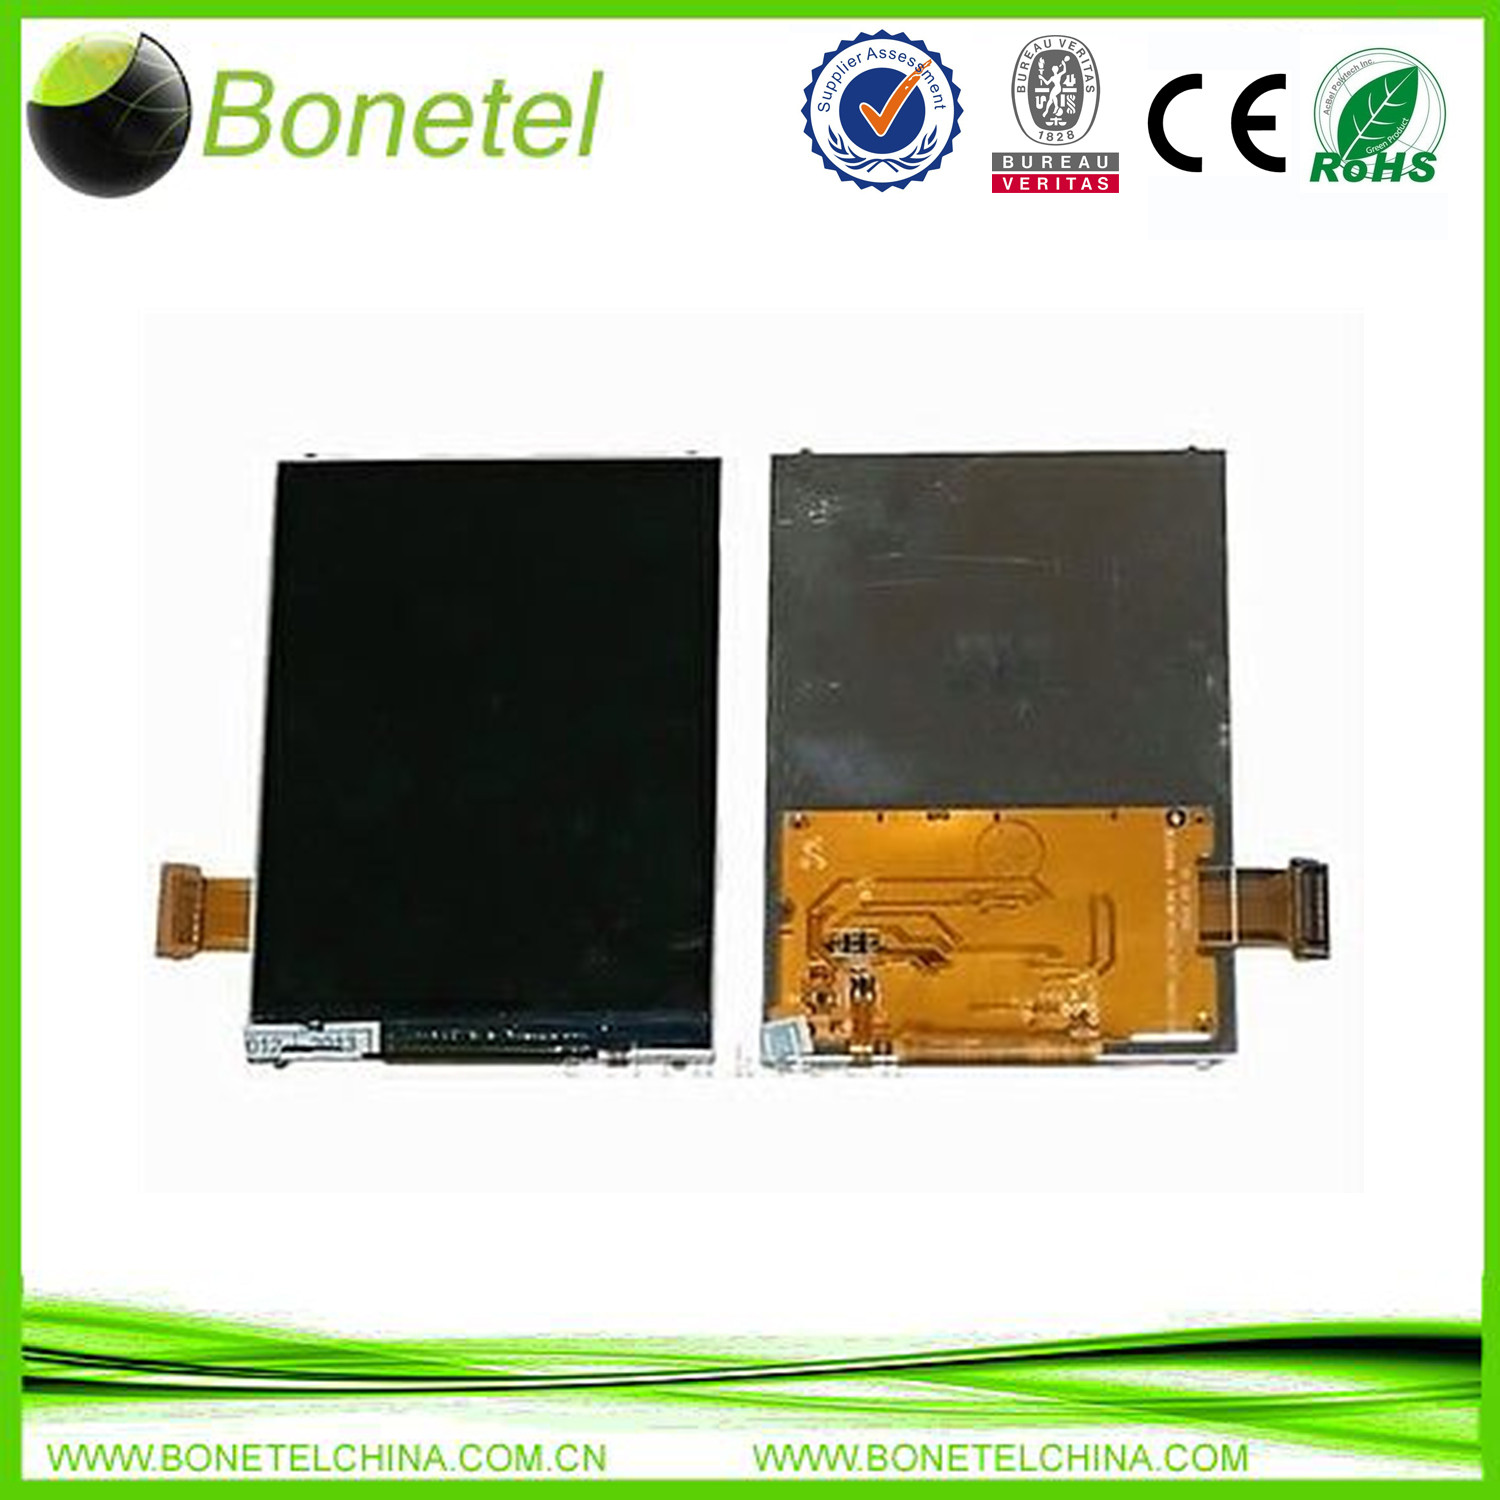 Internal LCD Screen Display Replacement Part For Samsung S5300 Galaxy Pocket UK